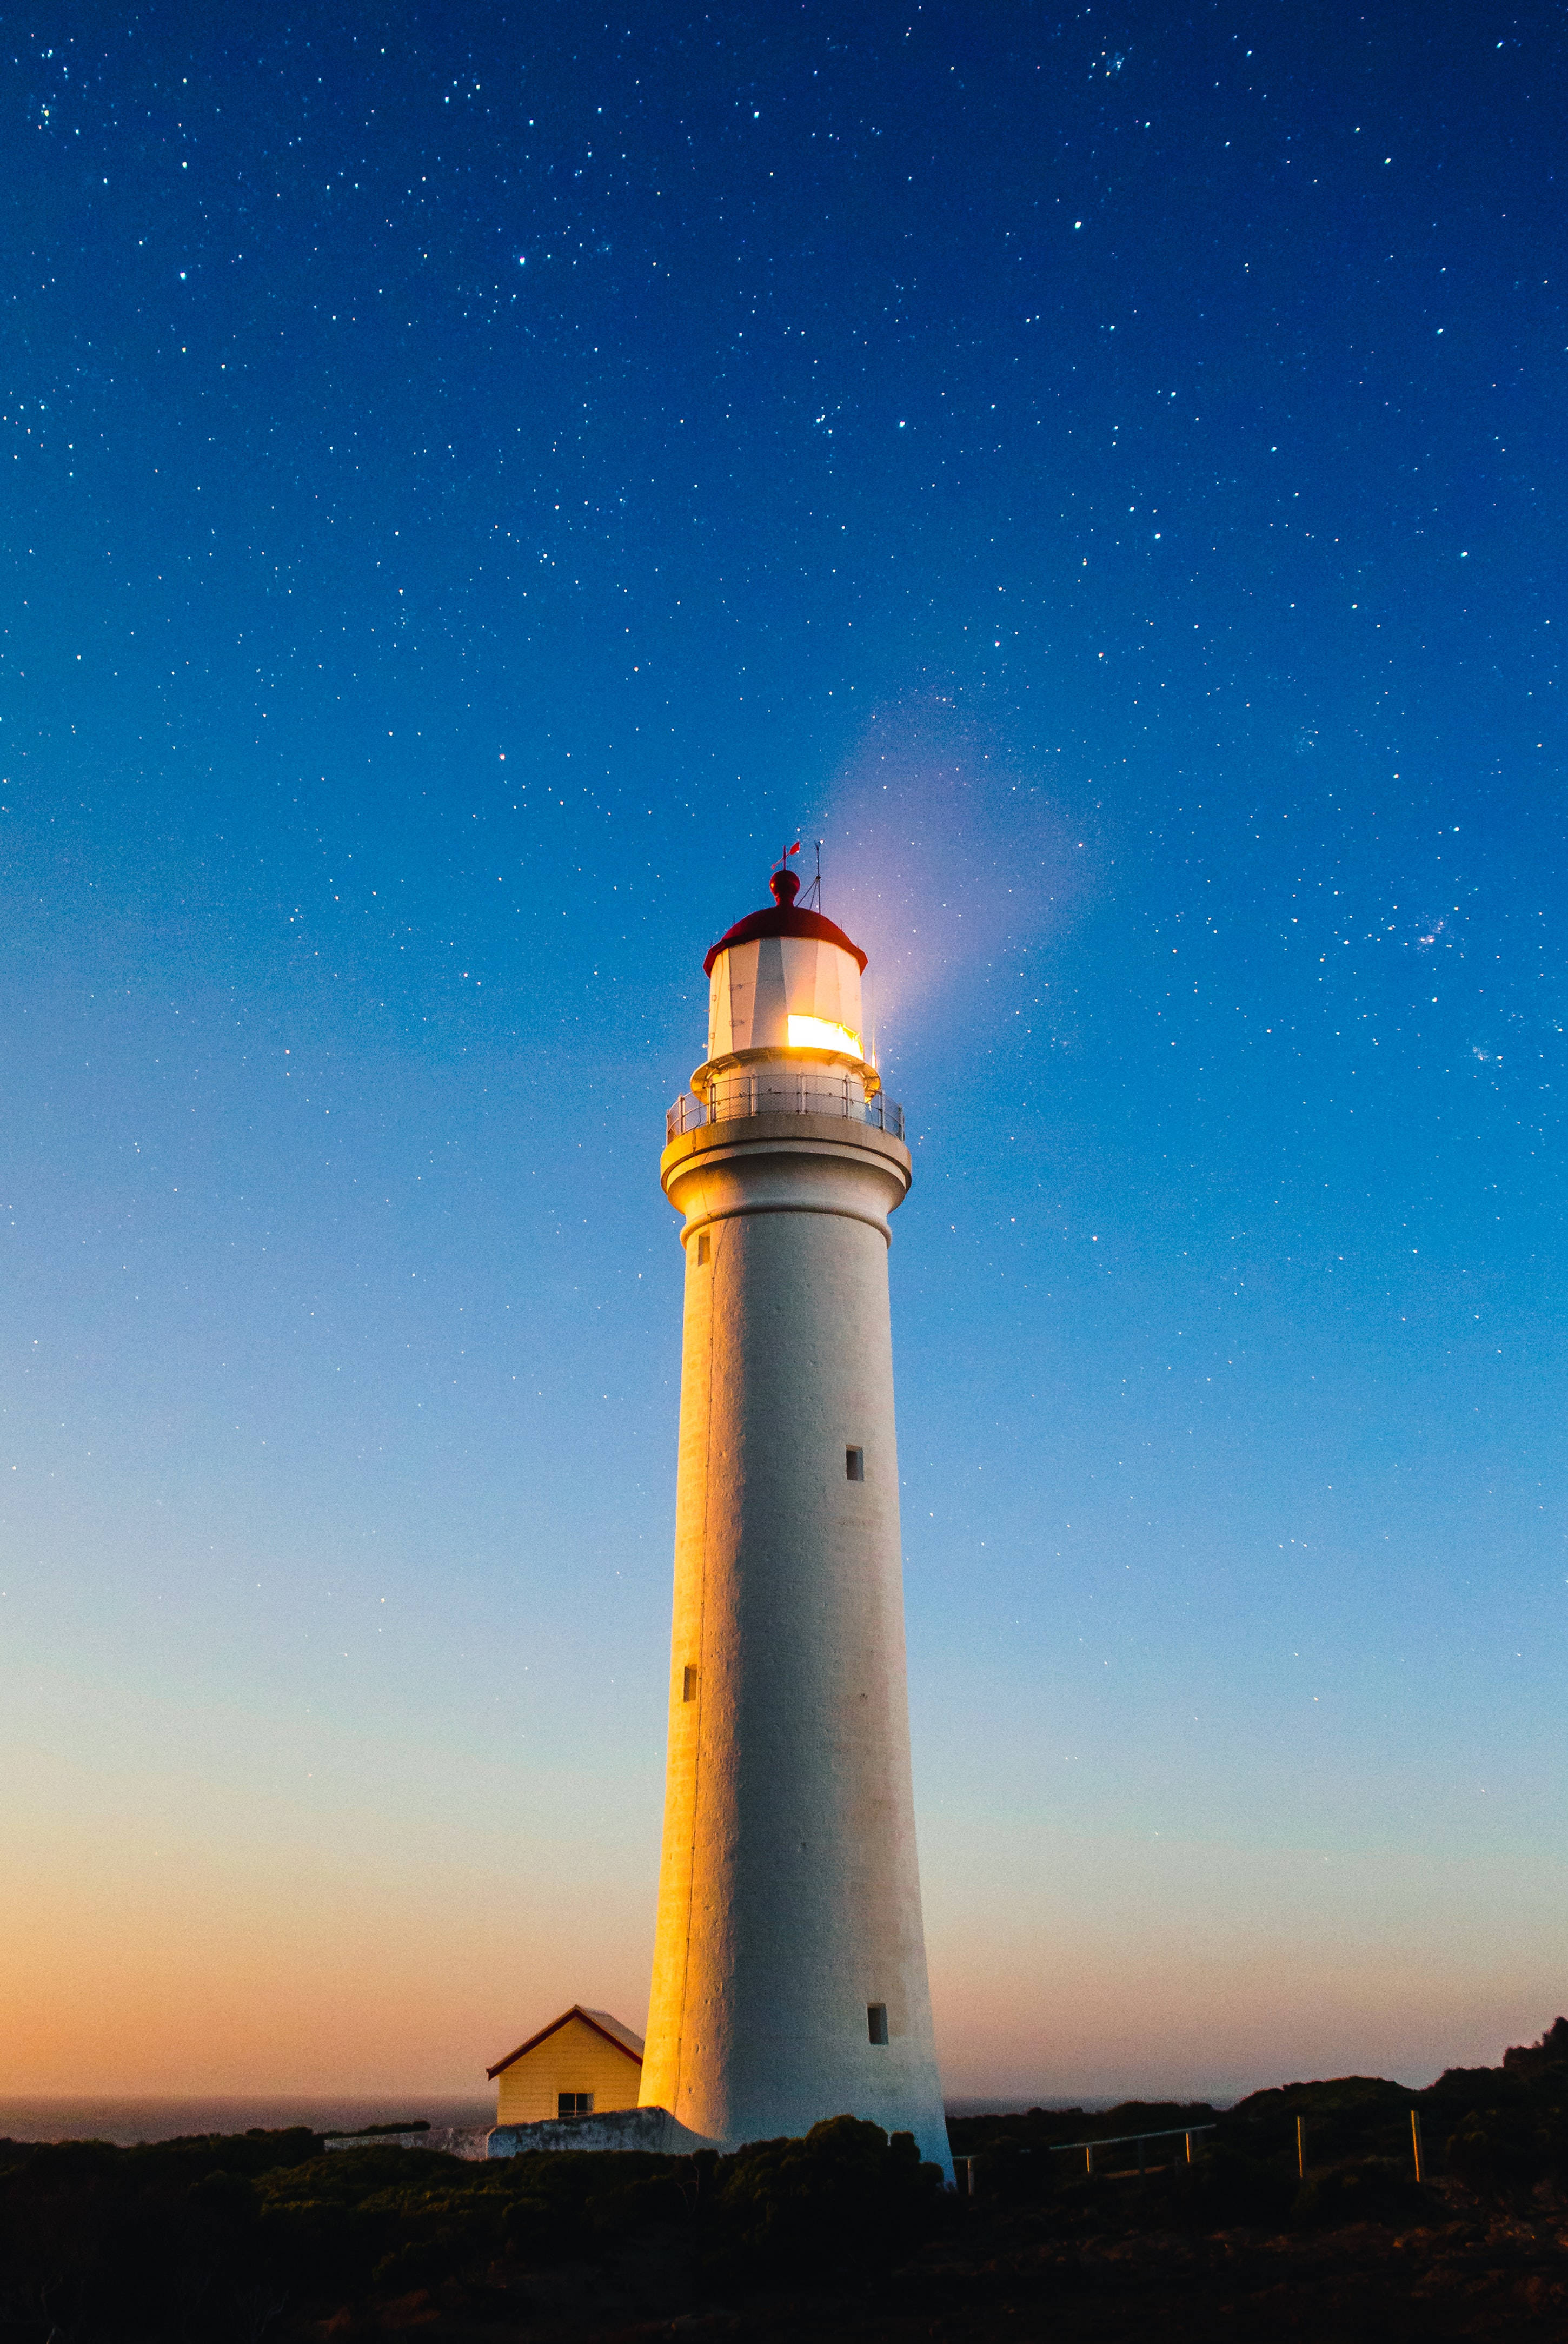 Mesmerizing 4k Ultra Hd Phone Wallpaper Of A Lighthouse Under The Blue Sky